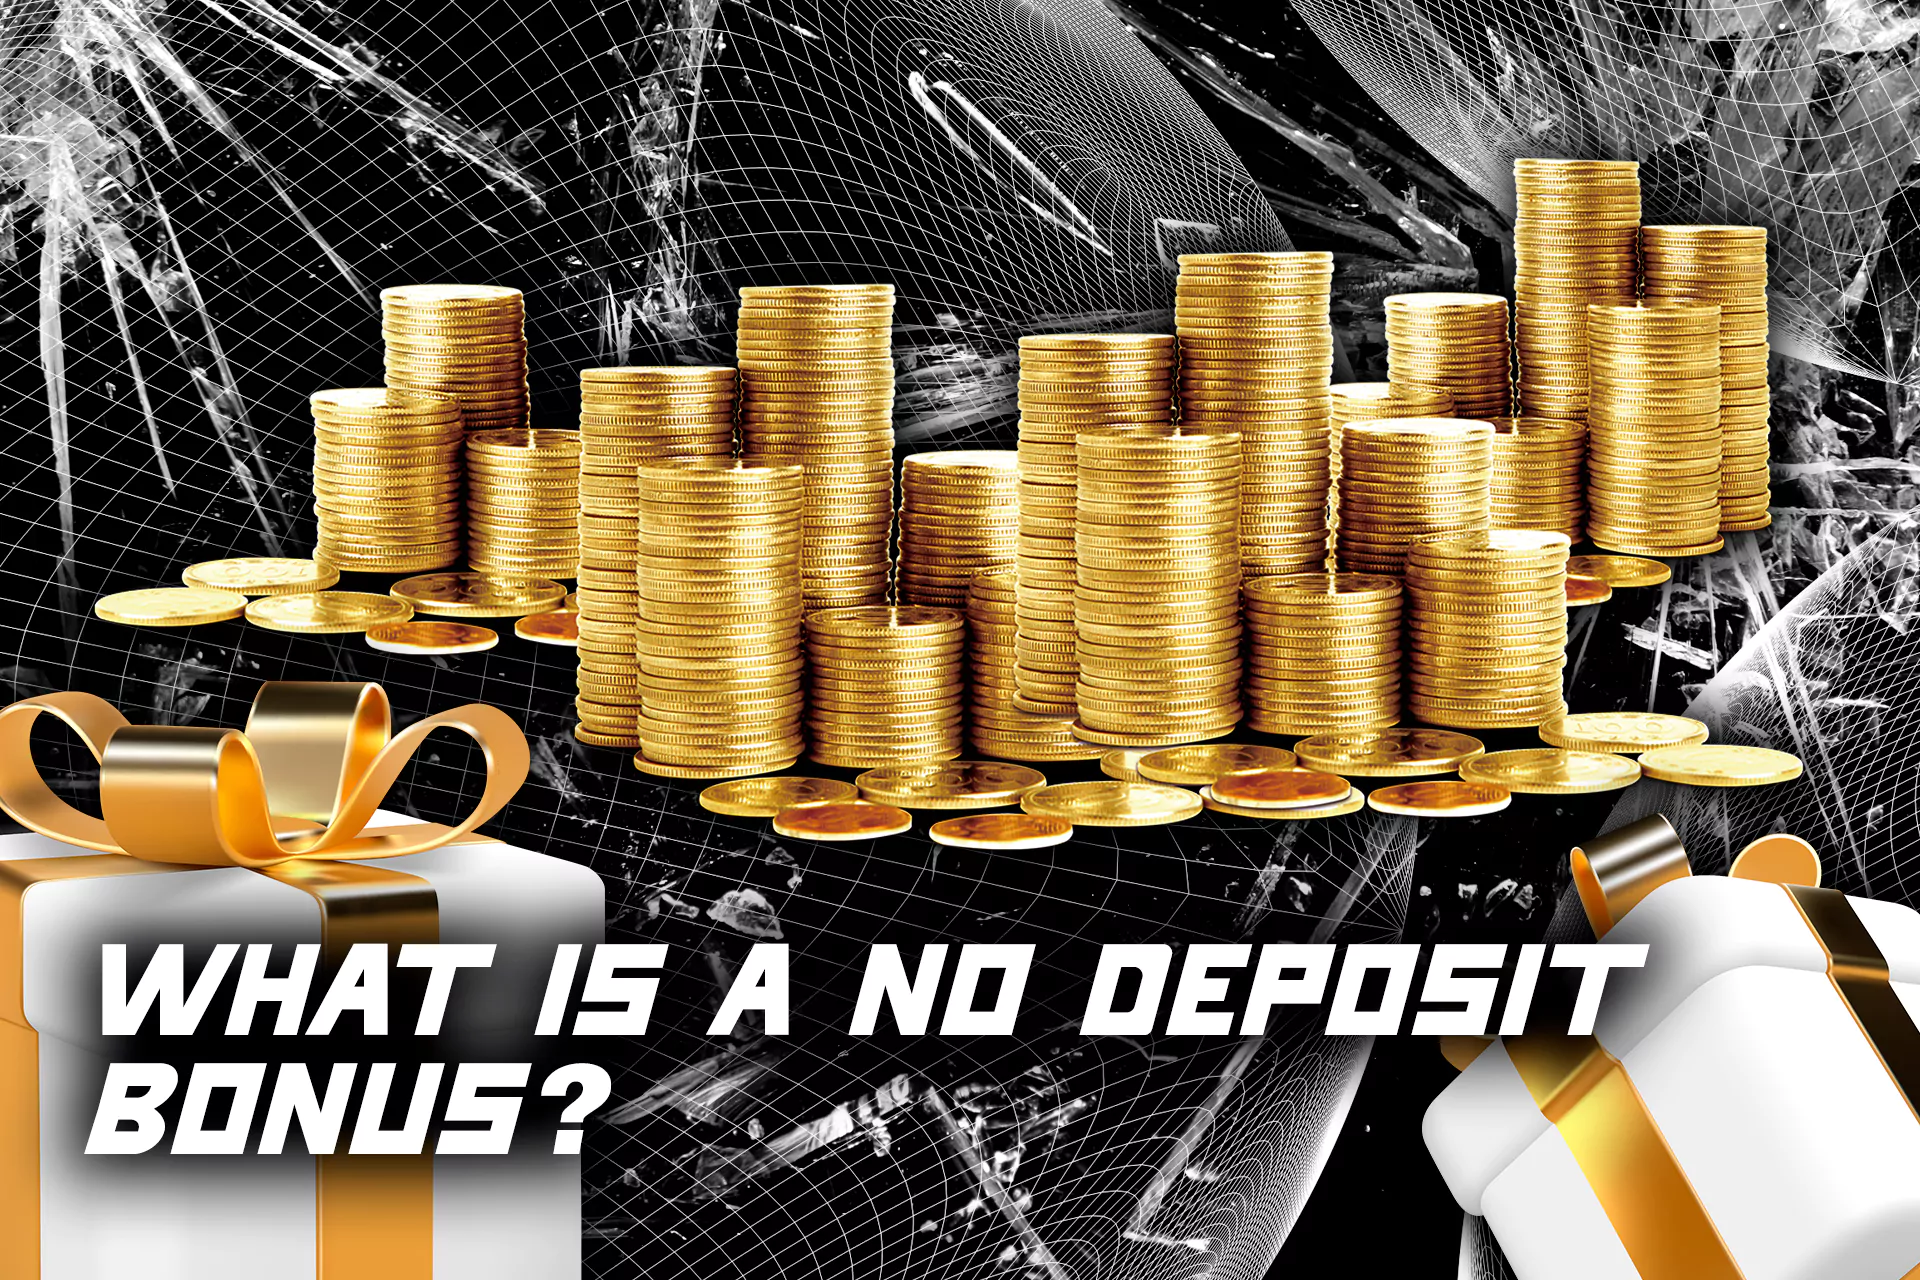 No deposit bonus means that you do not need to make a deposit to get it.